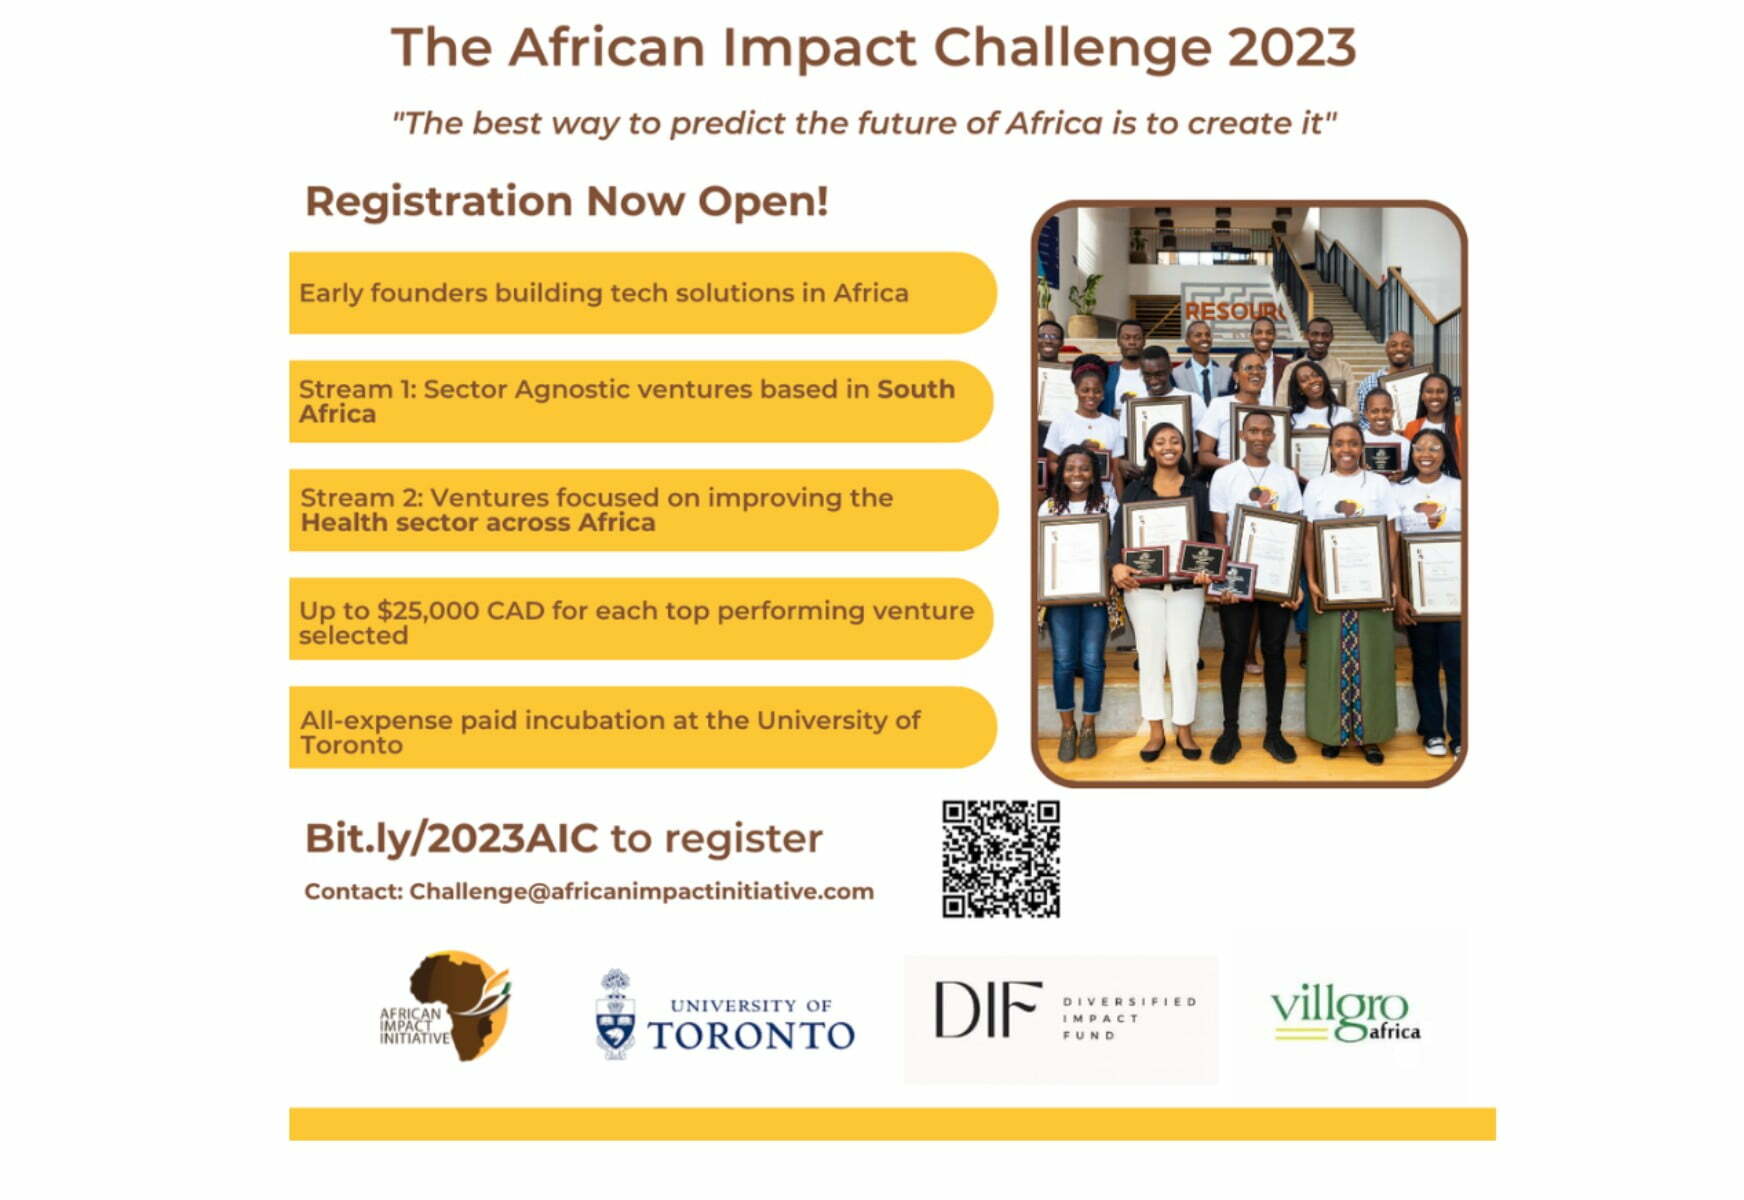 African Impact Challenge 2023 for early-stage African entrepreneurs